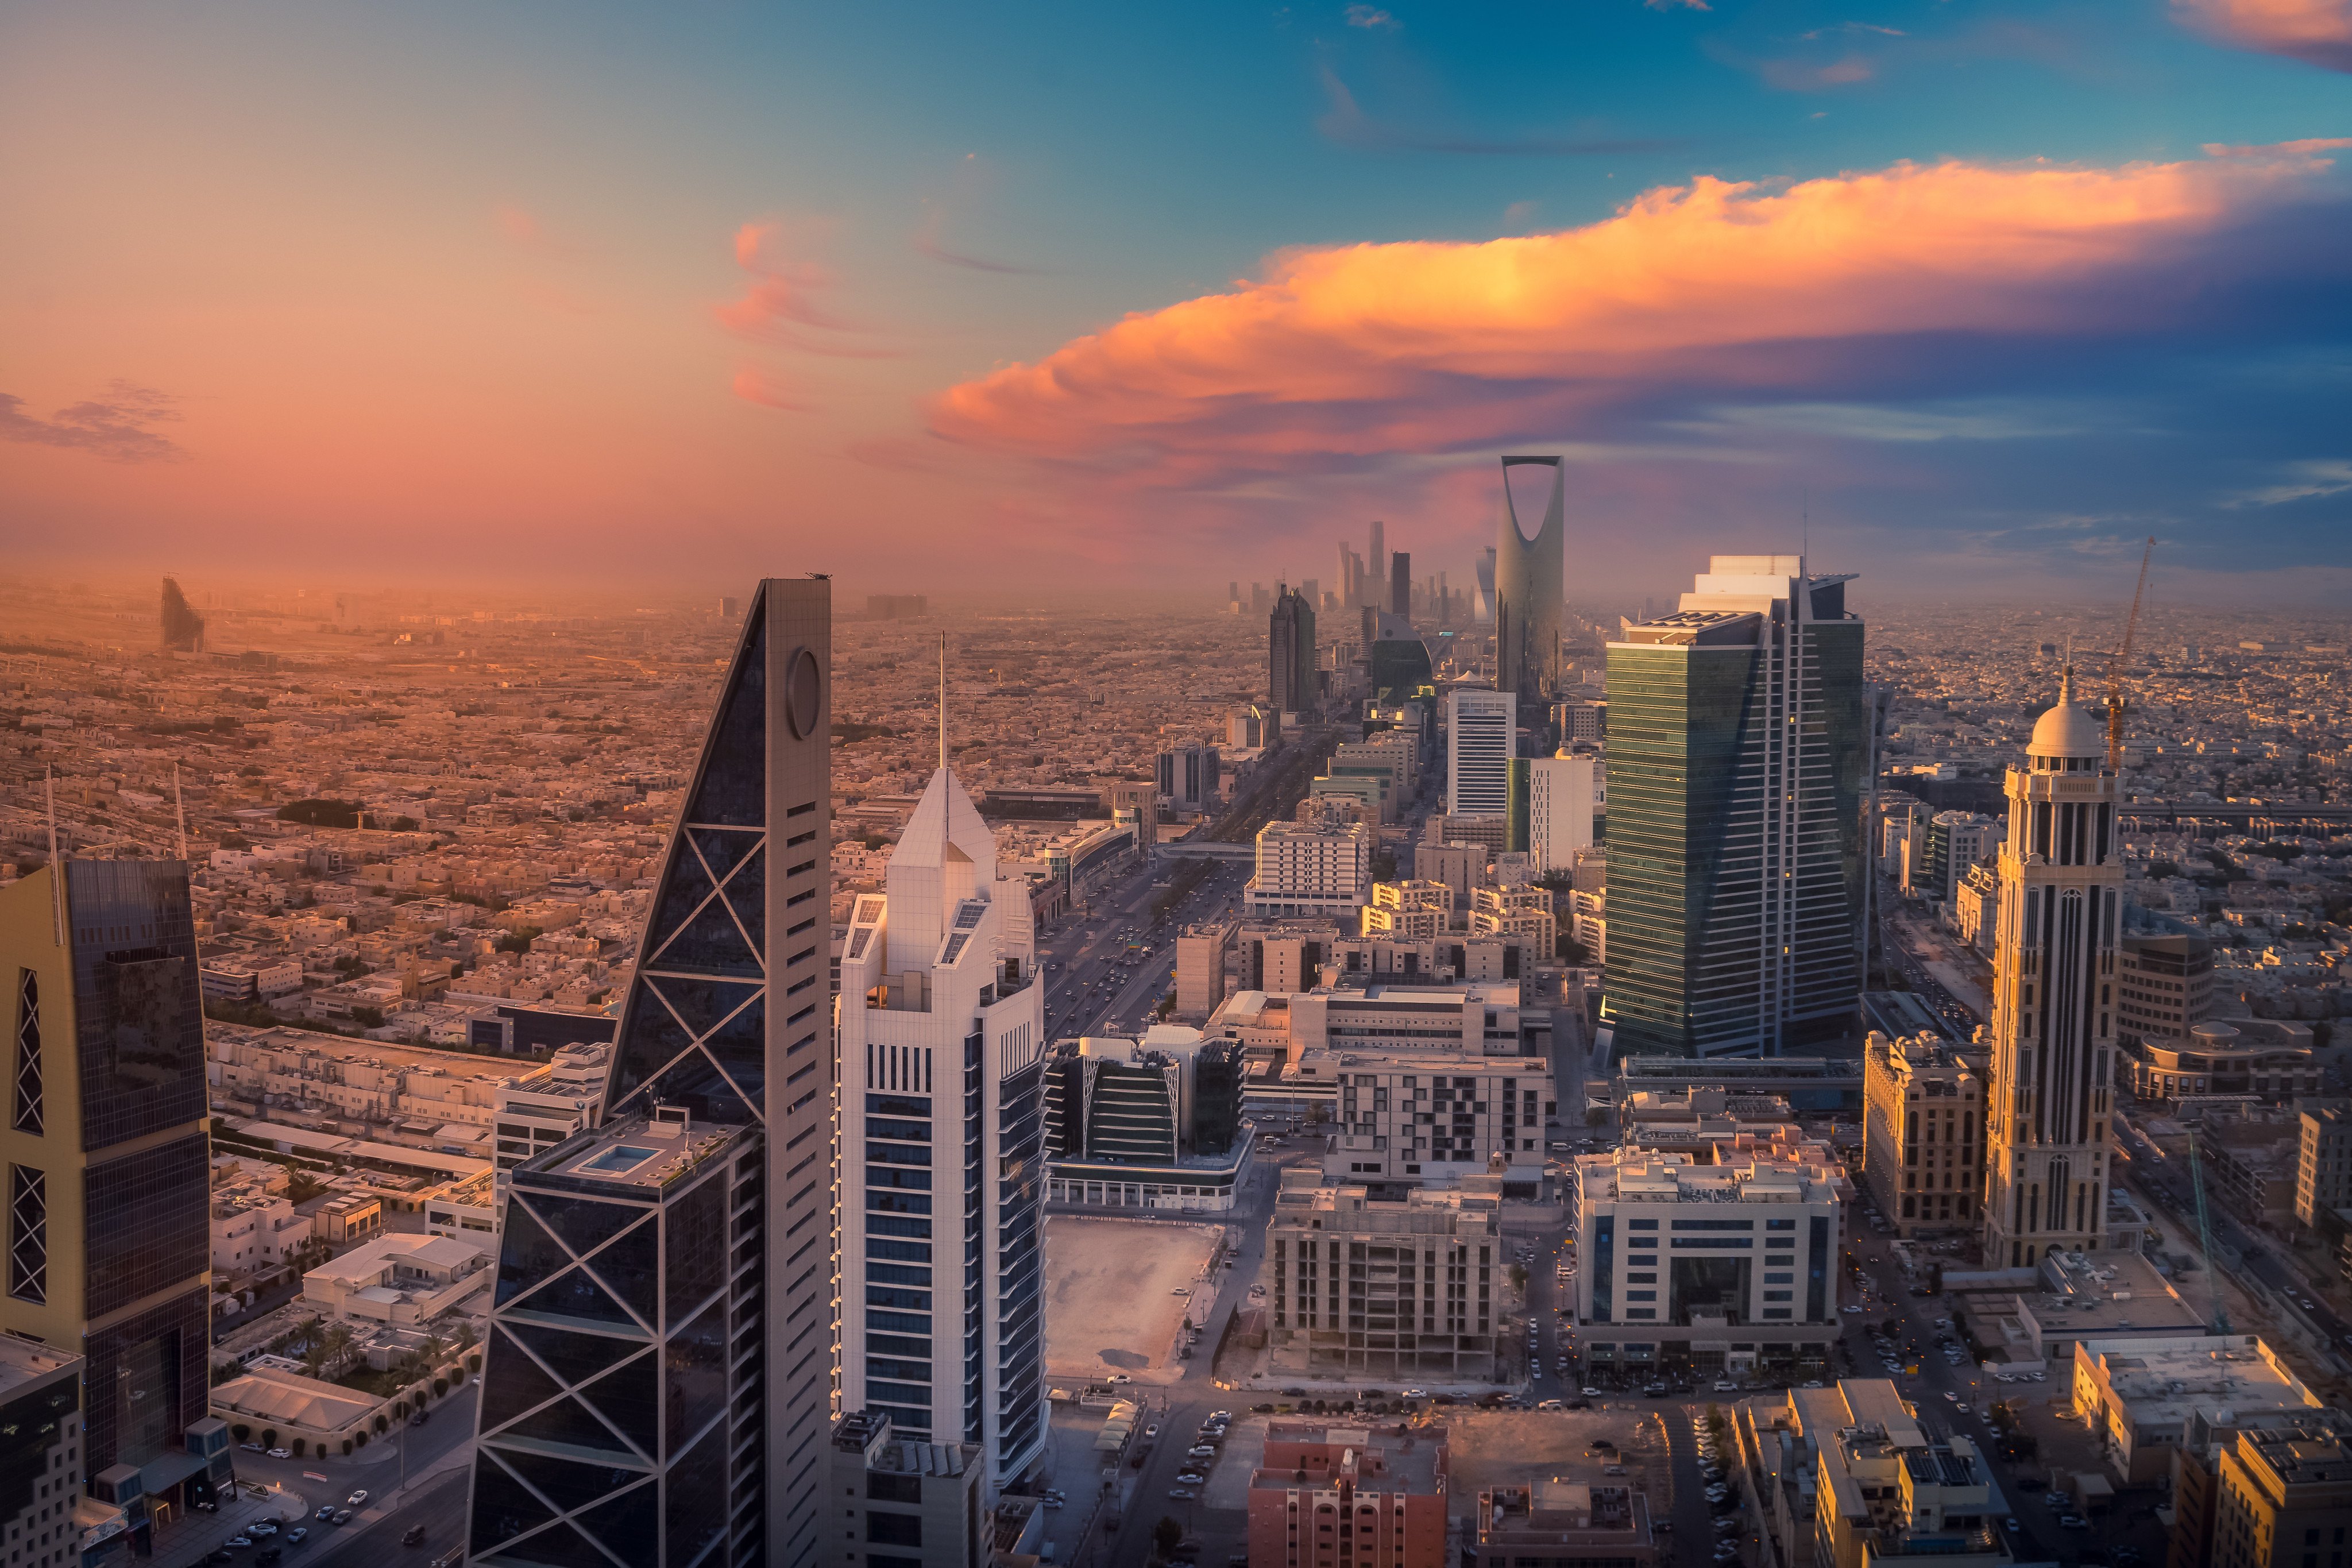 Saudi Arabia is vying for regional leadership in advanced technology, with the hopes of creating data centers, AI companies and semiconductor manufacturing. Photo: Shutterstock